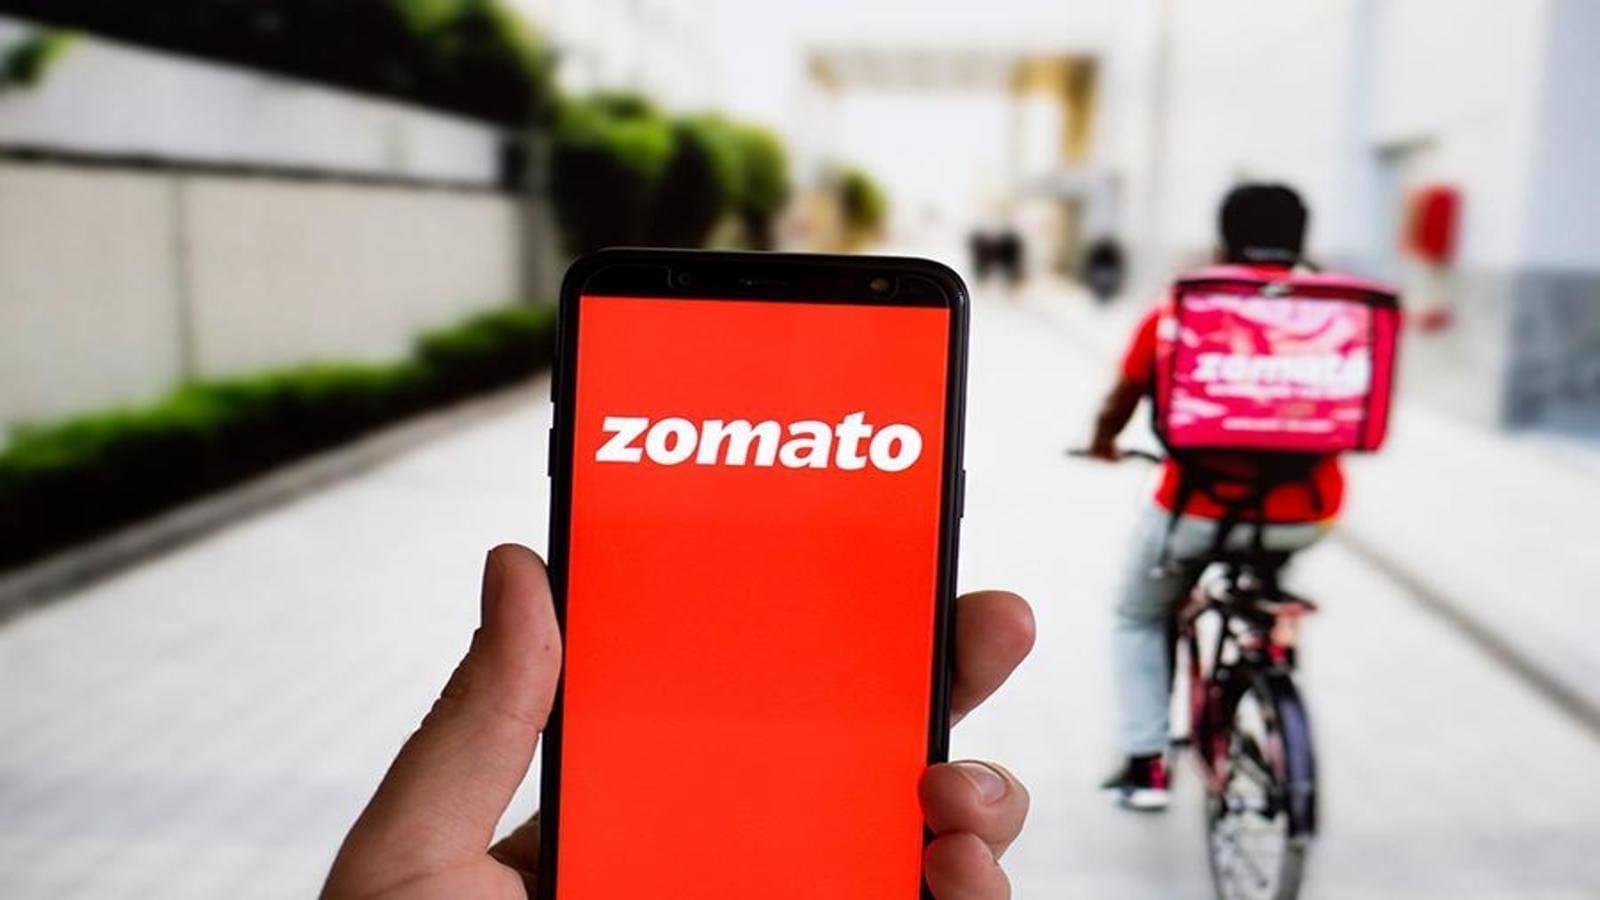 Zomato files for $1.11bn IPO as food delivery surges in pandemic